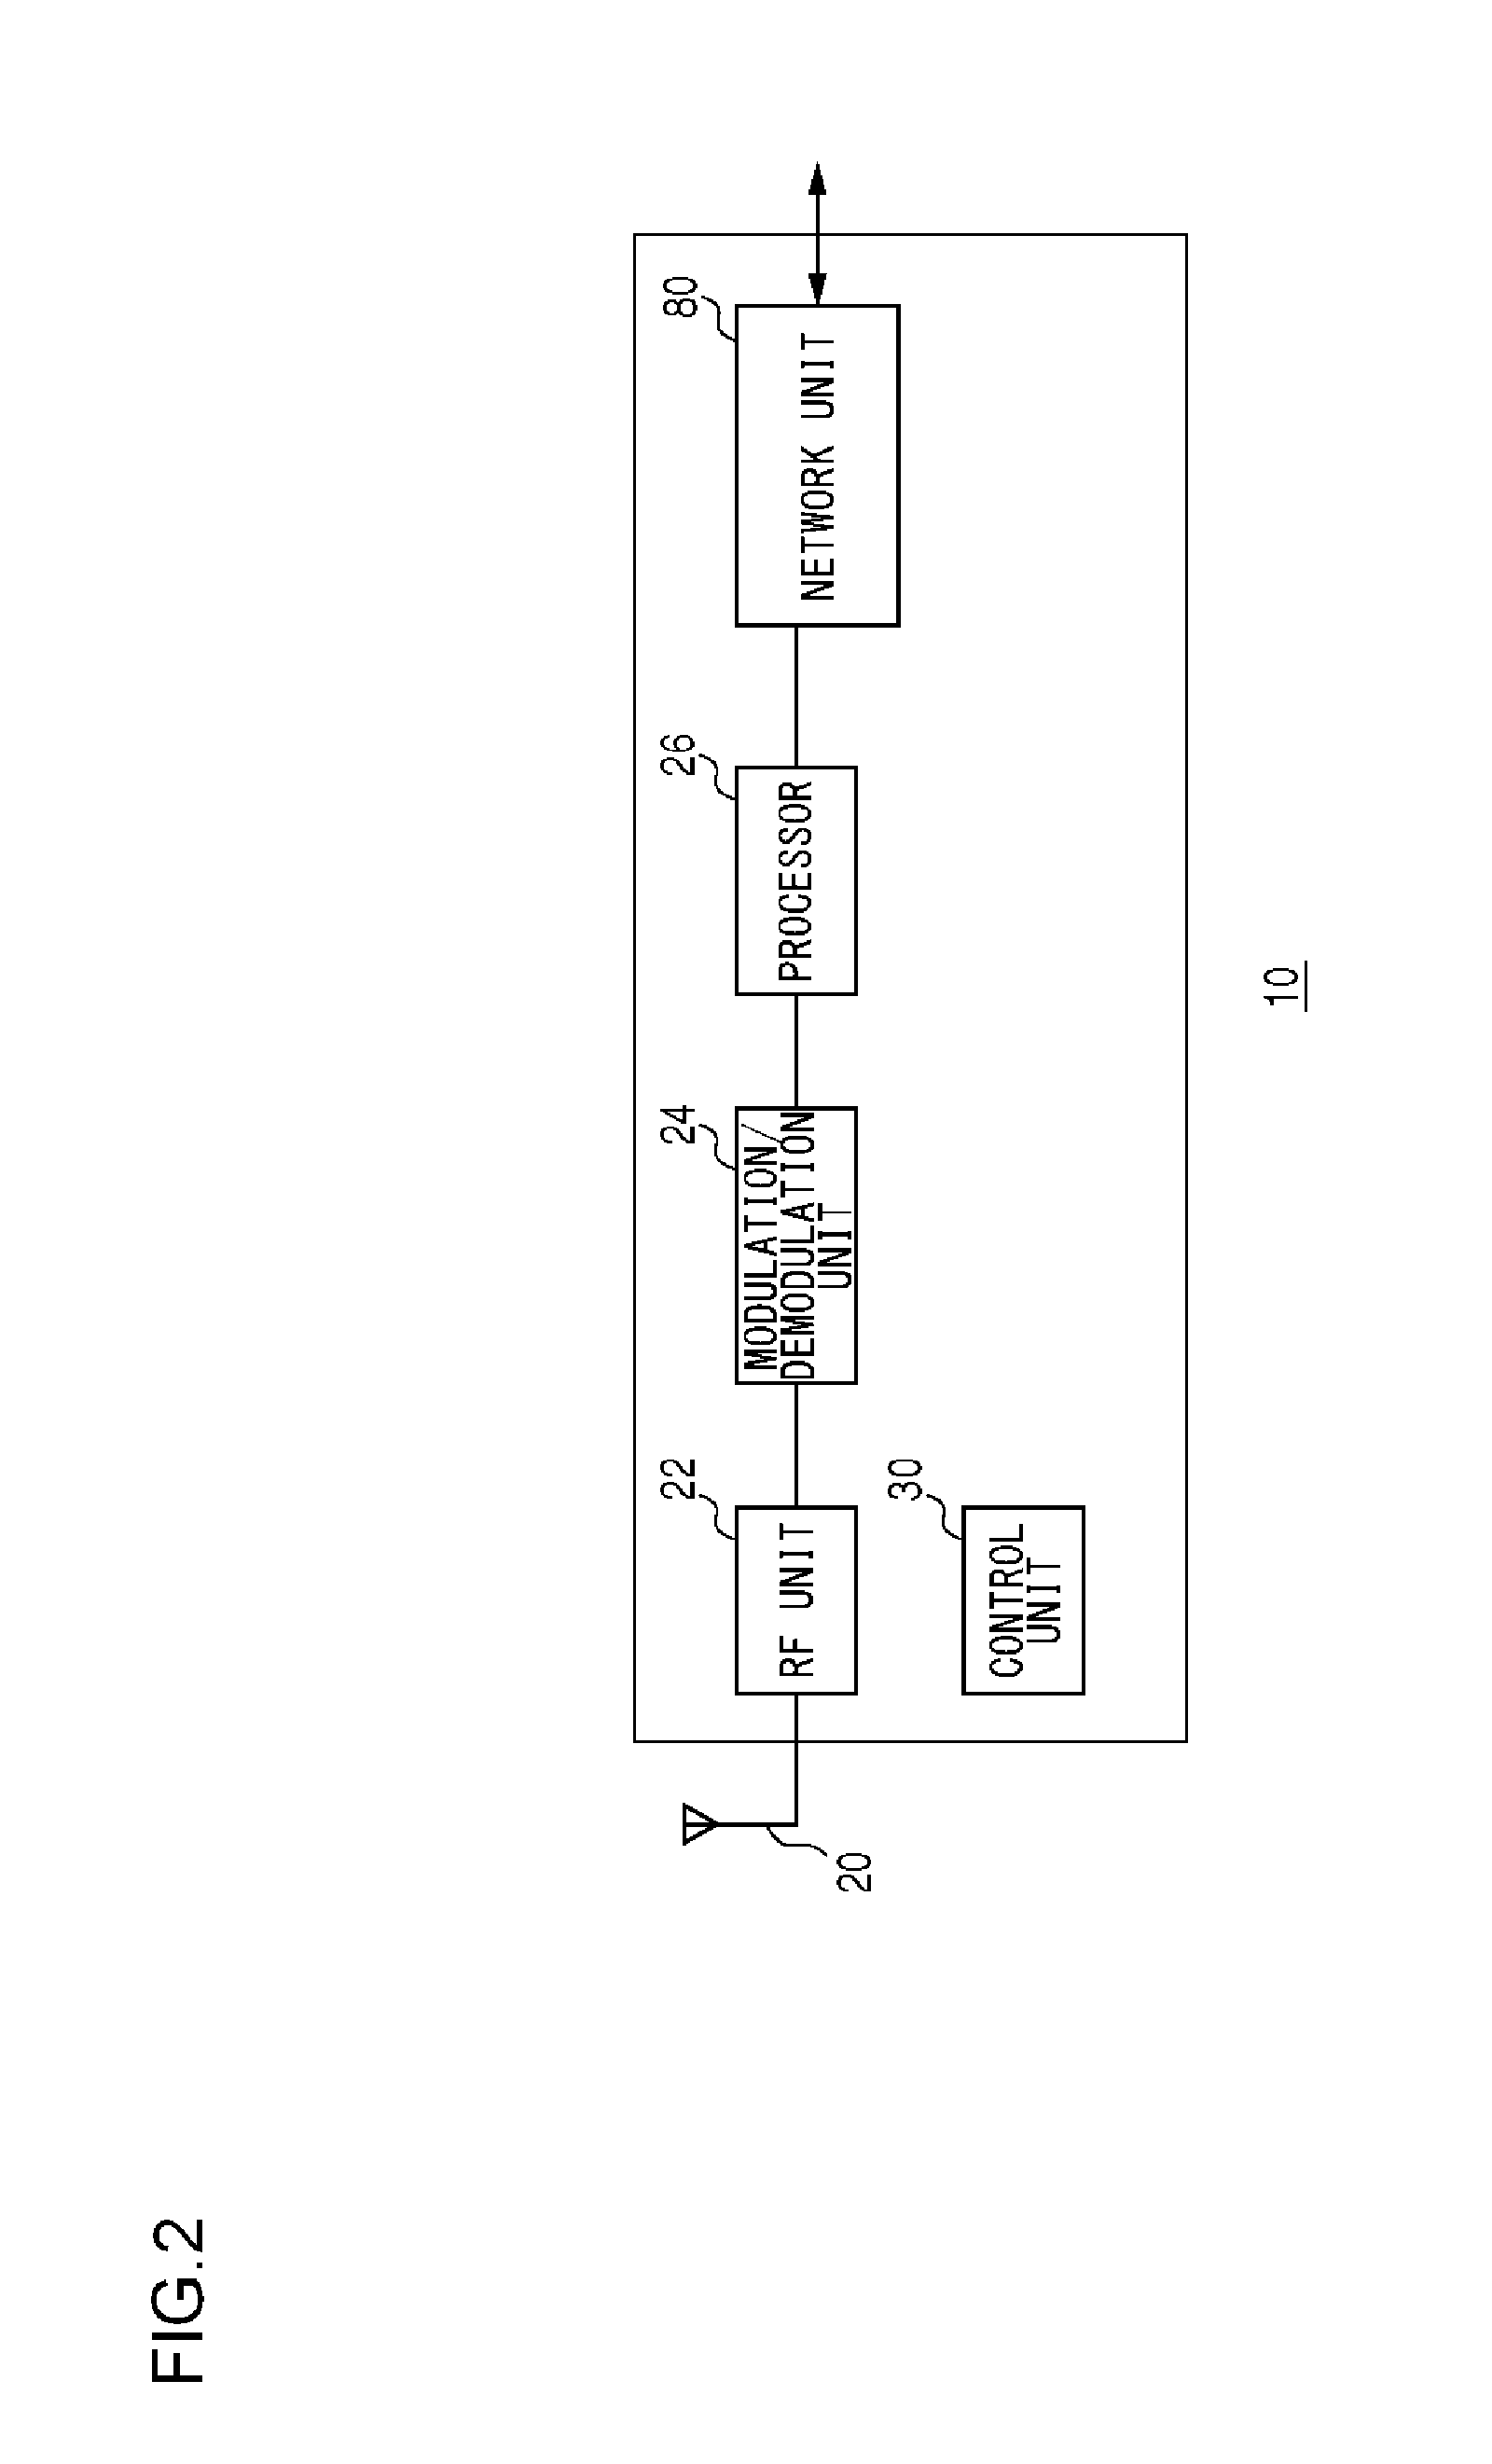 Terminal apparatus mounted on a vehicle to perform vehicle-to-vehicle communication